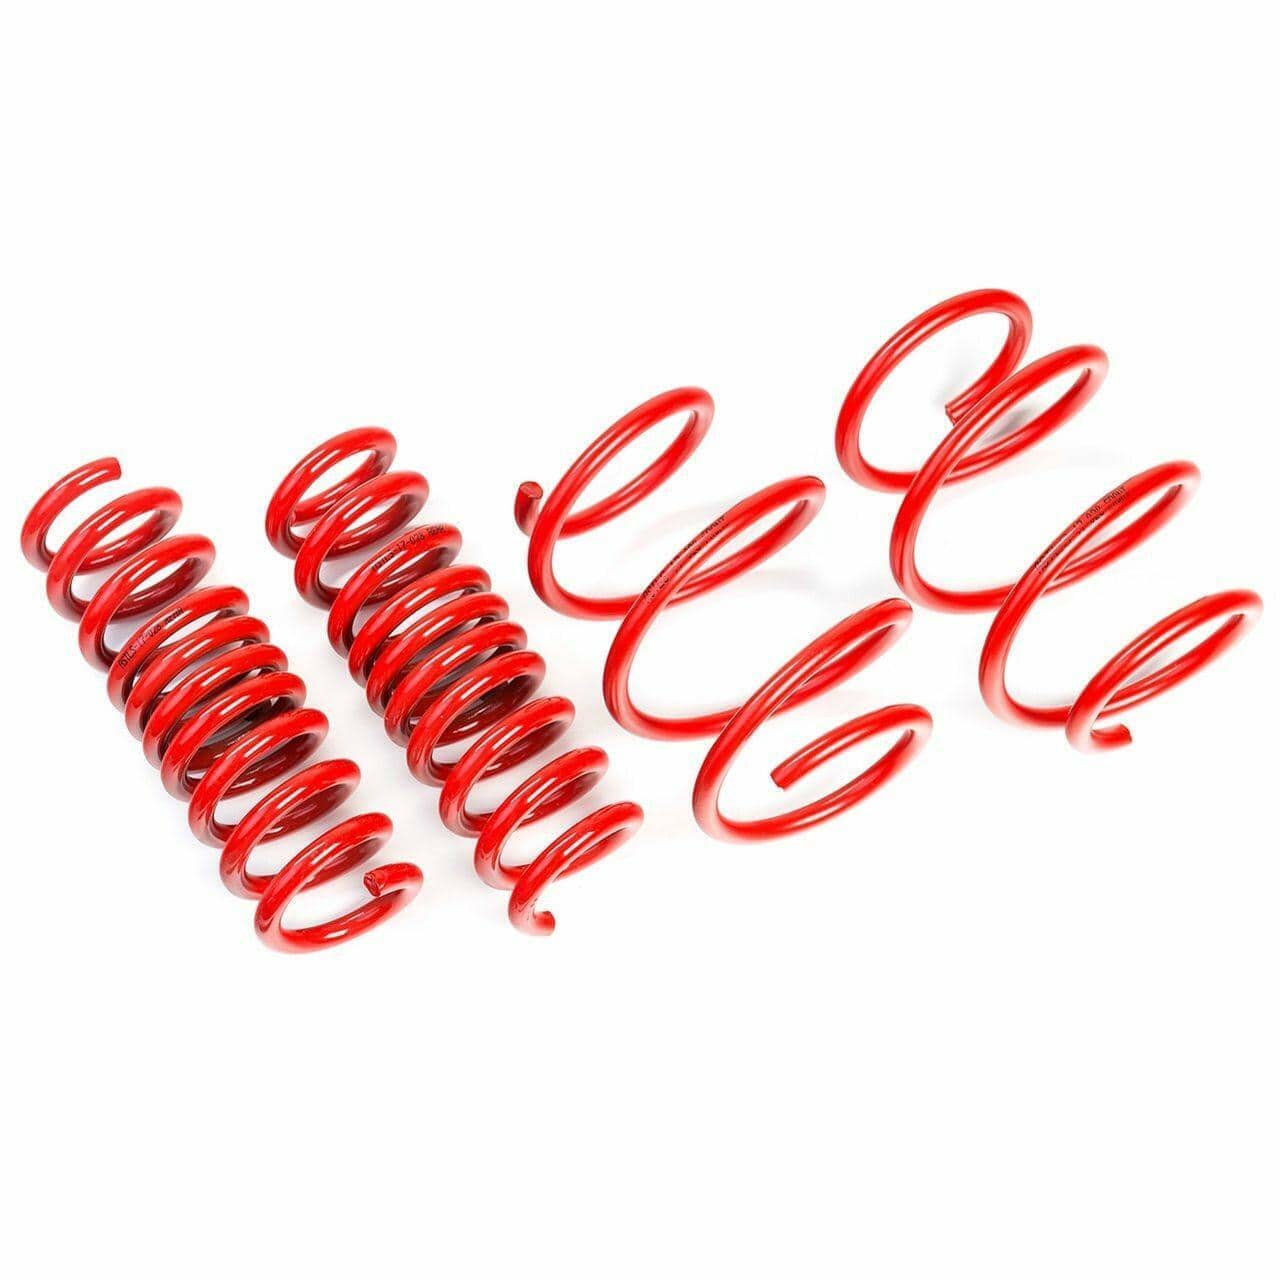 AST Suspension Lowering Springs (35MM/25MM TUV) - 2006-2013 BMW 3 Series 320i/323i/325i/320D Coupe (E90/E92) ASTLS-17-023